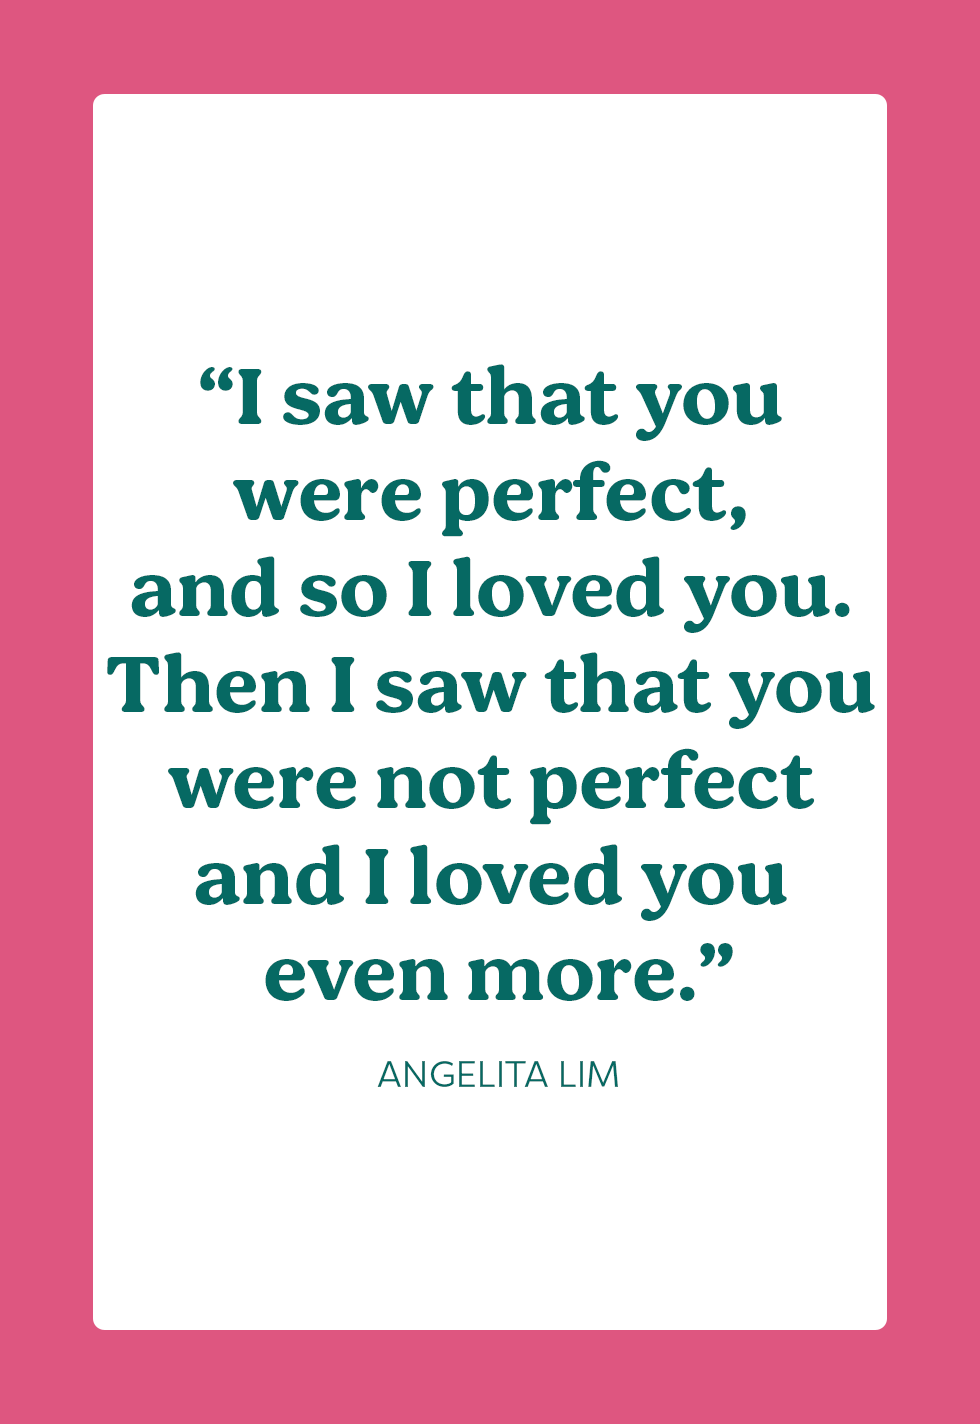 25 Best I Love You Quotes - Sayings and Messages About Love